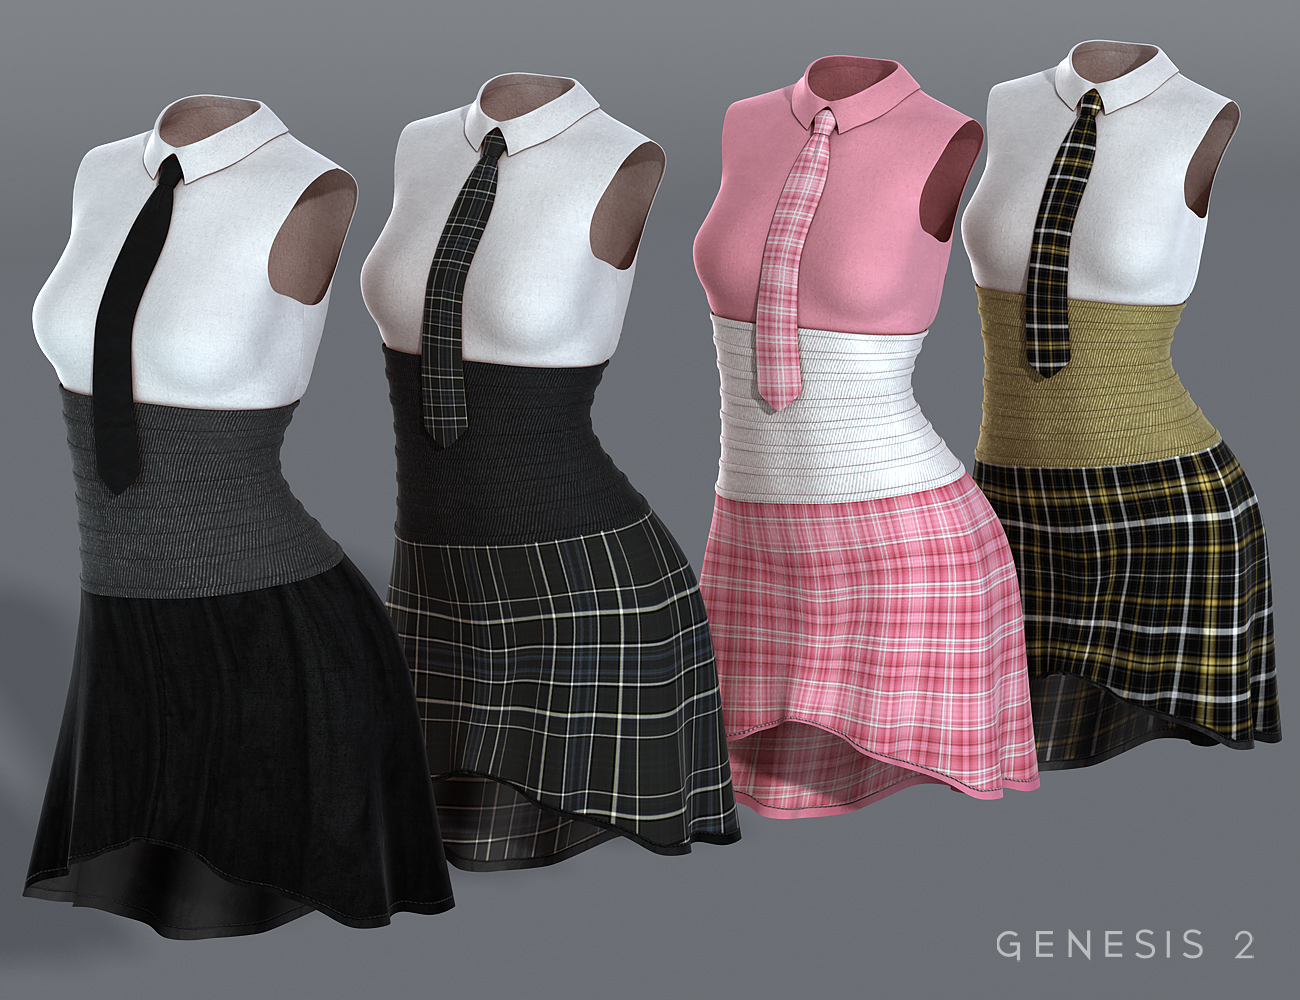 Private School Textures by: Sarsa, 3D Models by Daz 3D